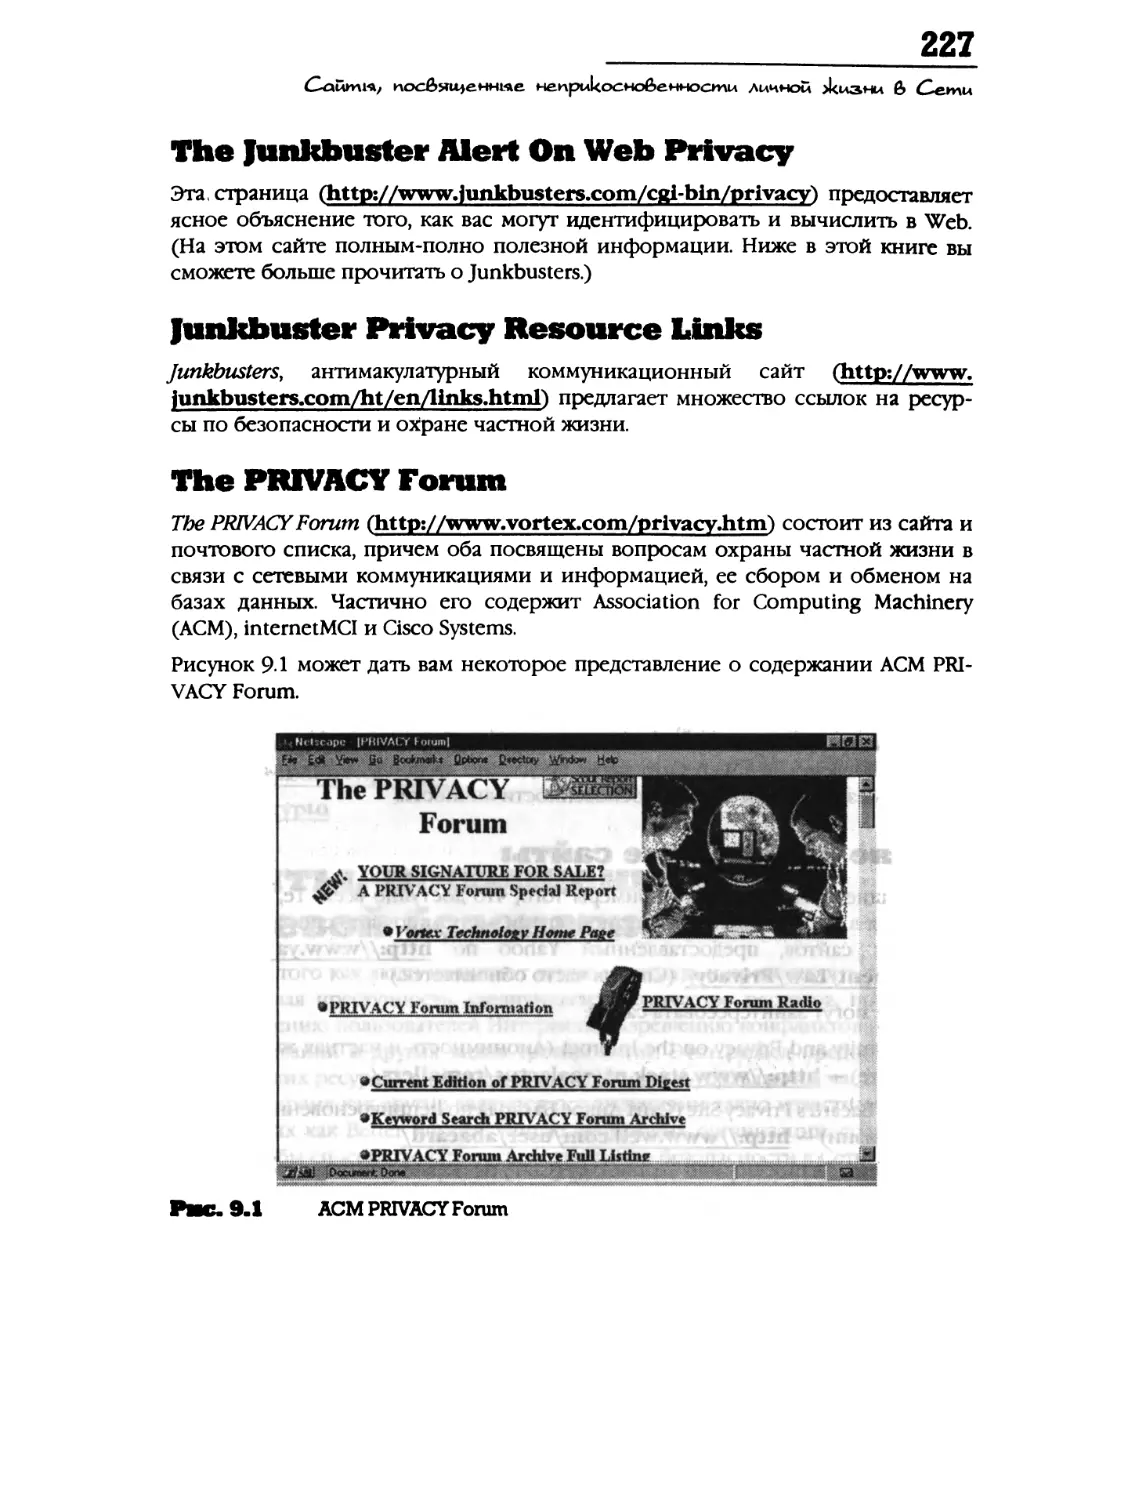 The Junkbuster Alert On Web Privacy
Junkbuster Privacy Resource Links
The PRIVACY Forum